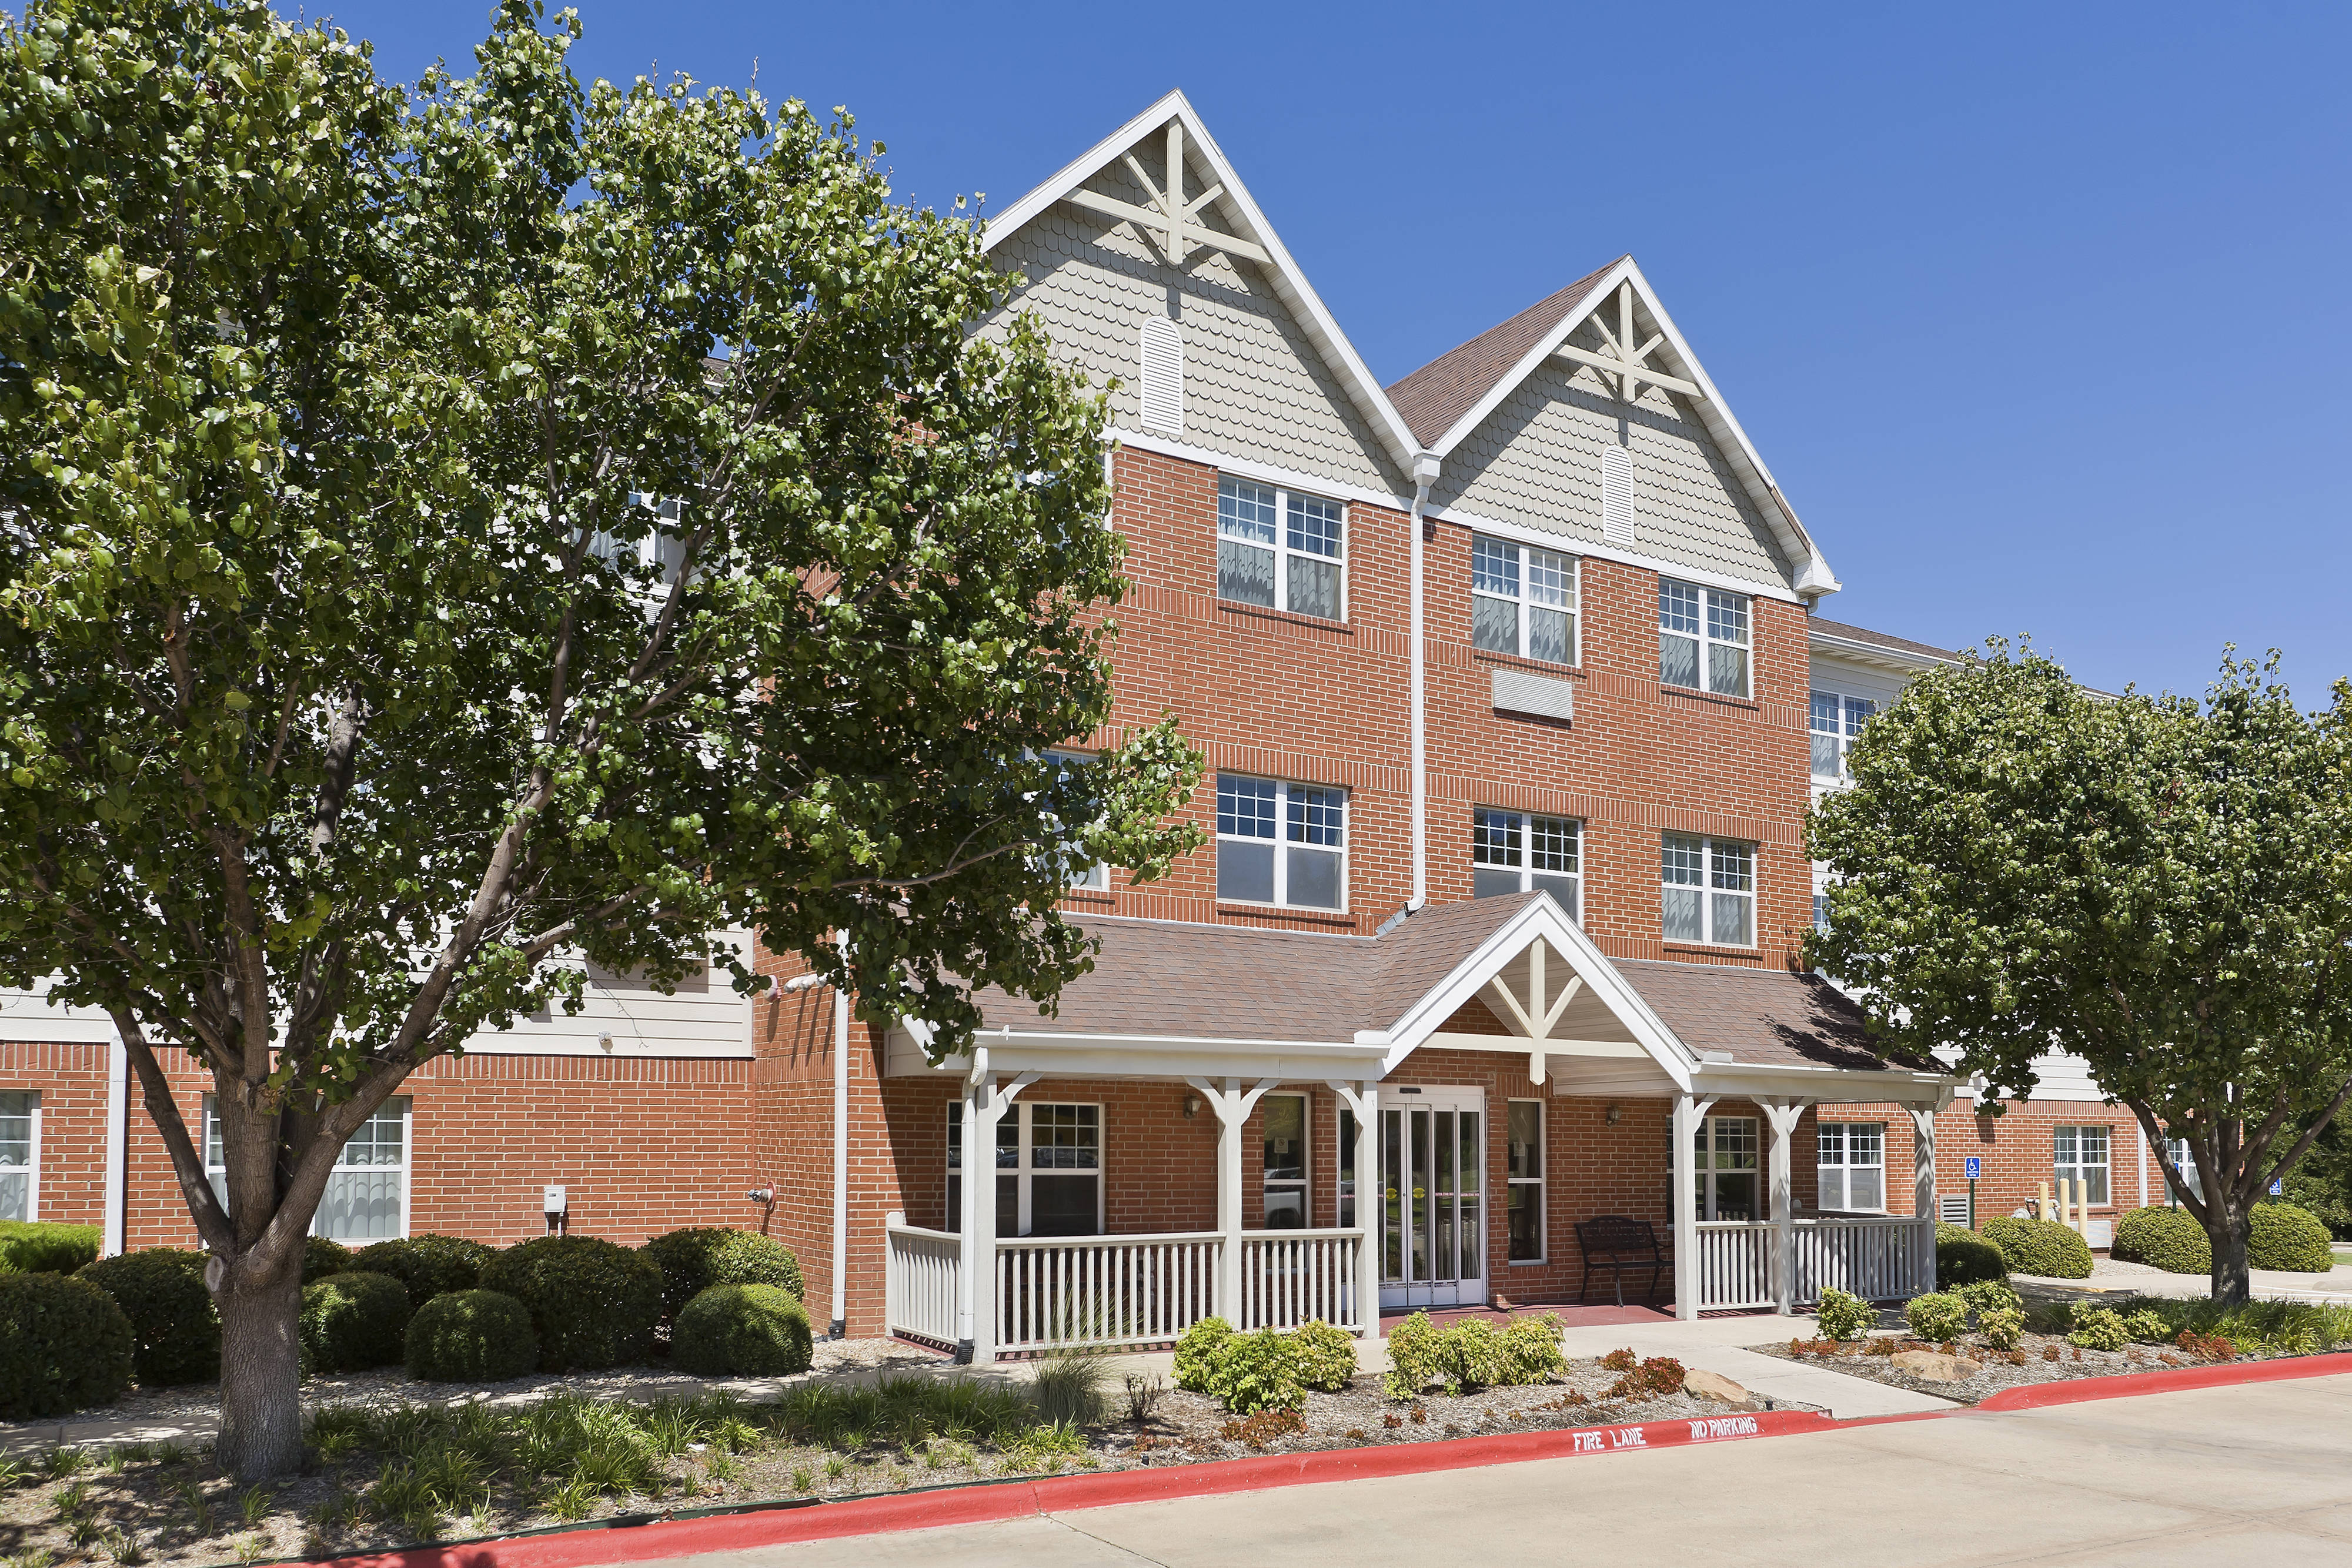 Photo of TownePlace Suites by Marriott Dallas Bedford, Bedford, TX